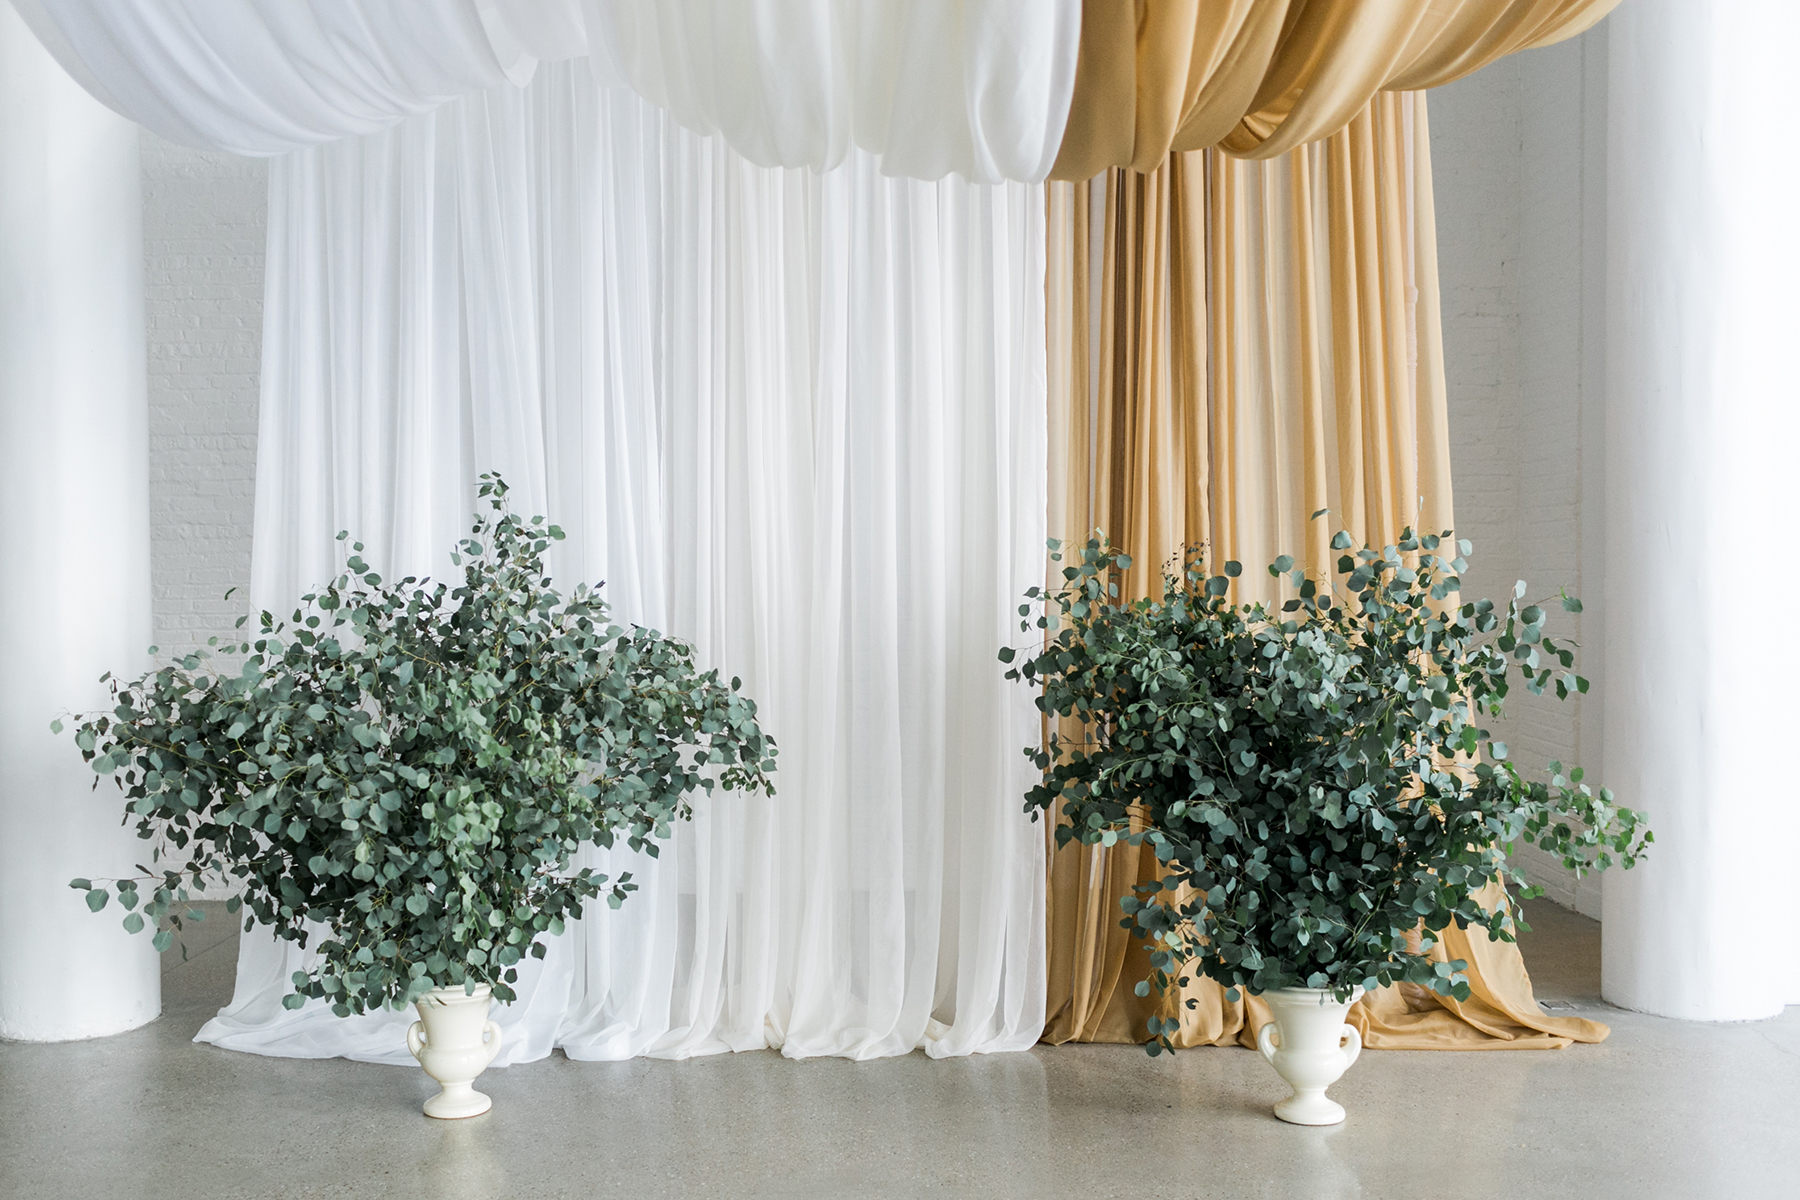 Enormous Greenery Urns for Wedding Altar